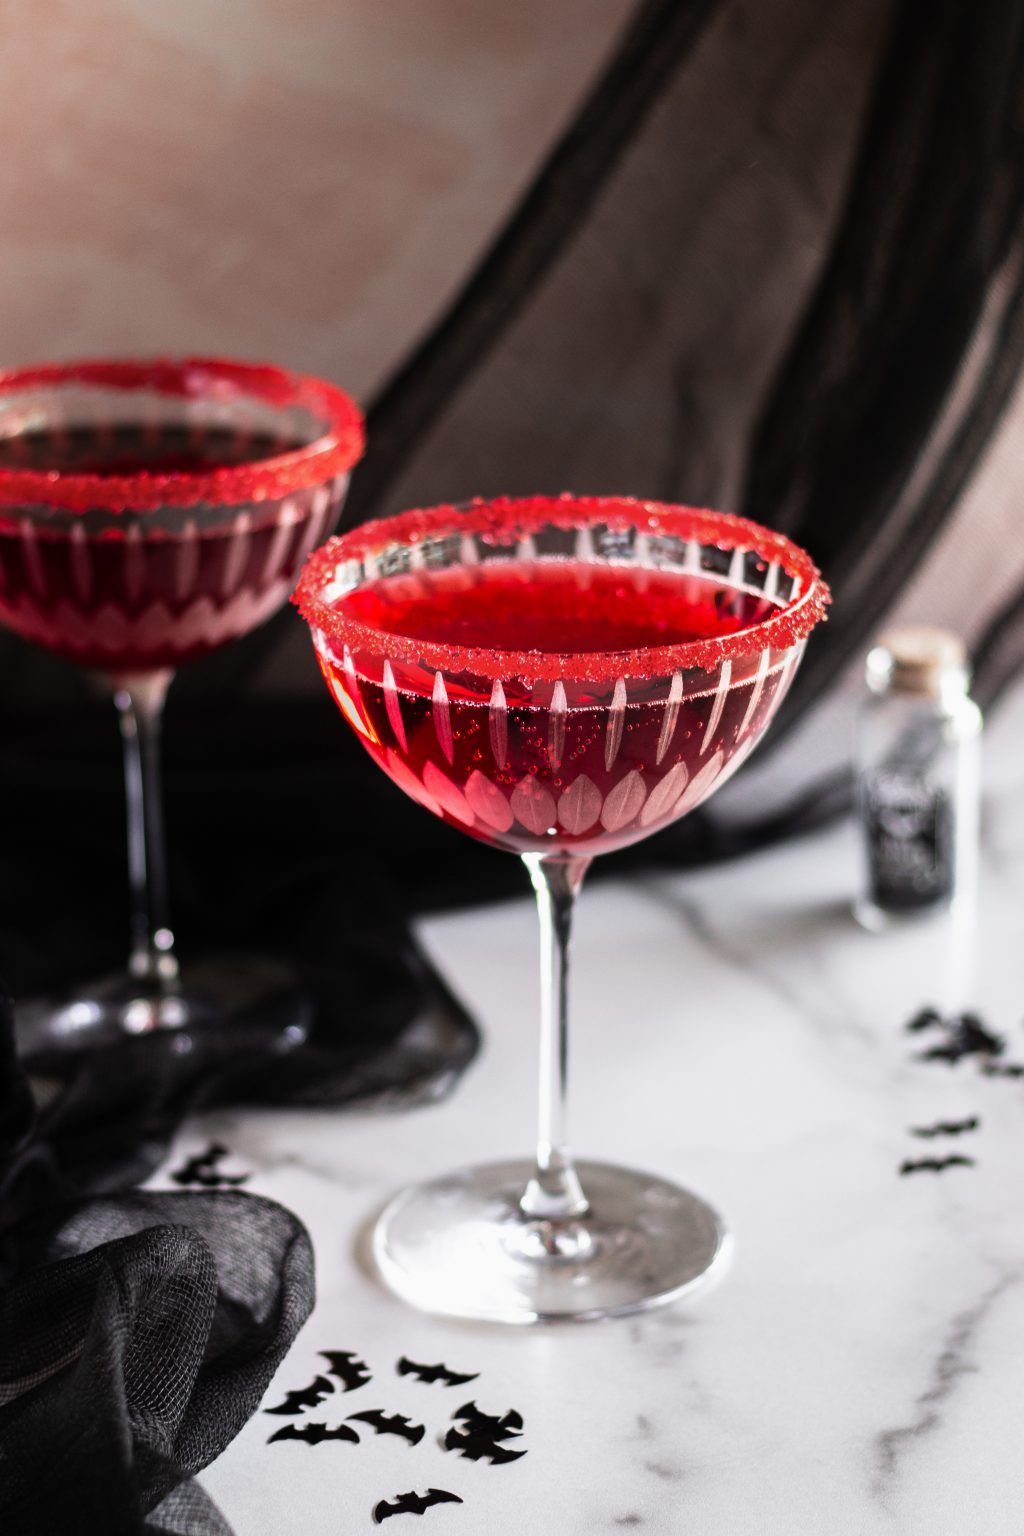 7 Spooky Halloween Cocktails You Need To Try - Unsobered